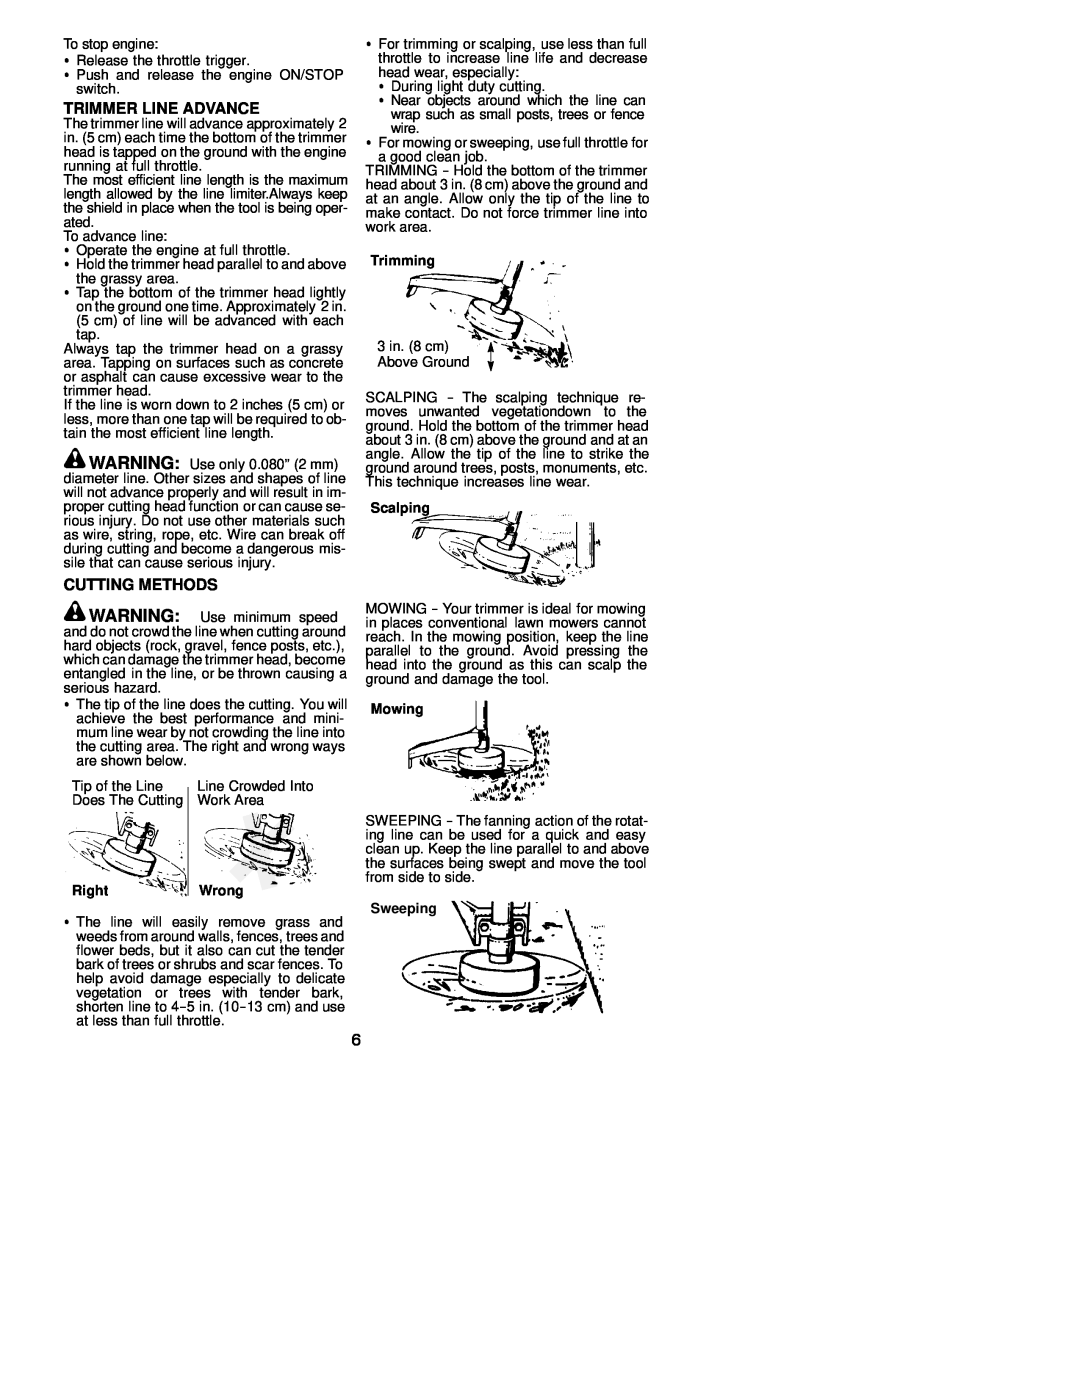 Weed Eater 530163364 instruction manual Trimmer Line Advance, Cutting Methods, Trimming, Scalping, Right, Mowing, Sweeping 